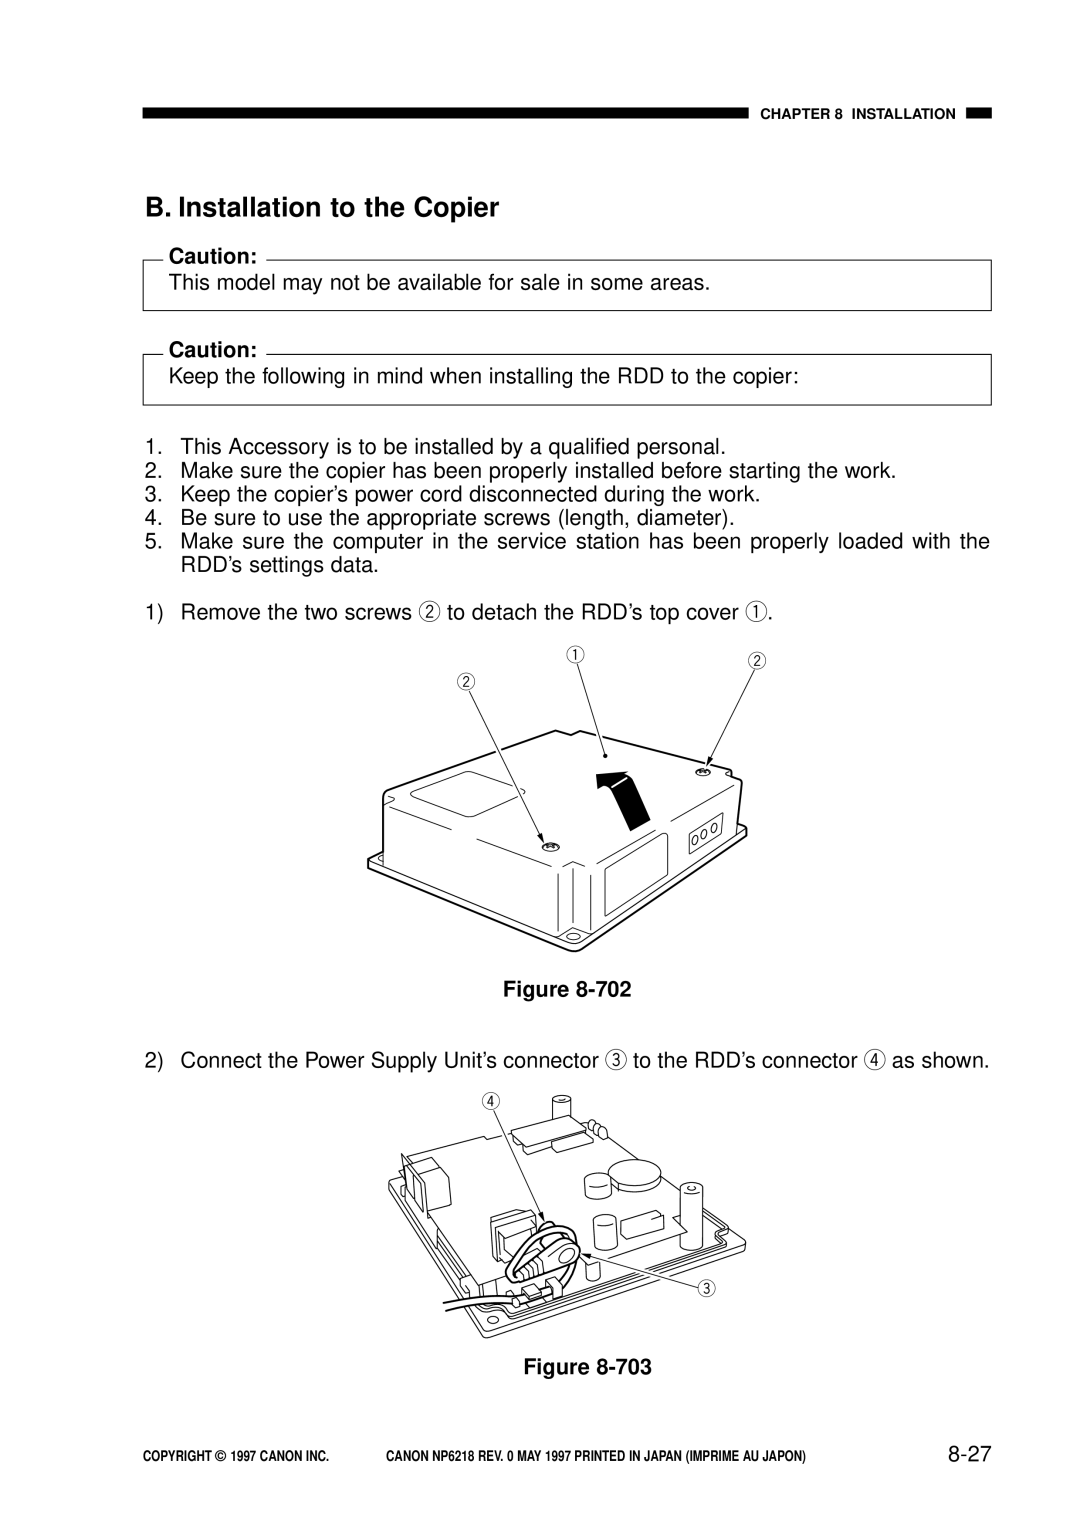 Canon FY8-13EX-000, NP6218 service manual B. Installation to the Copier, 8-27 